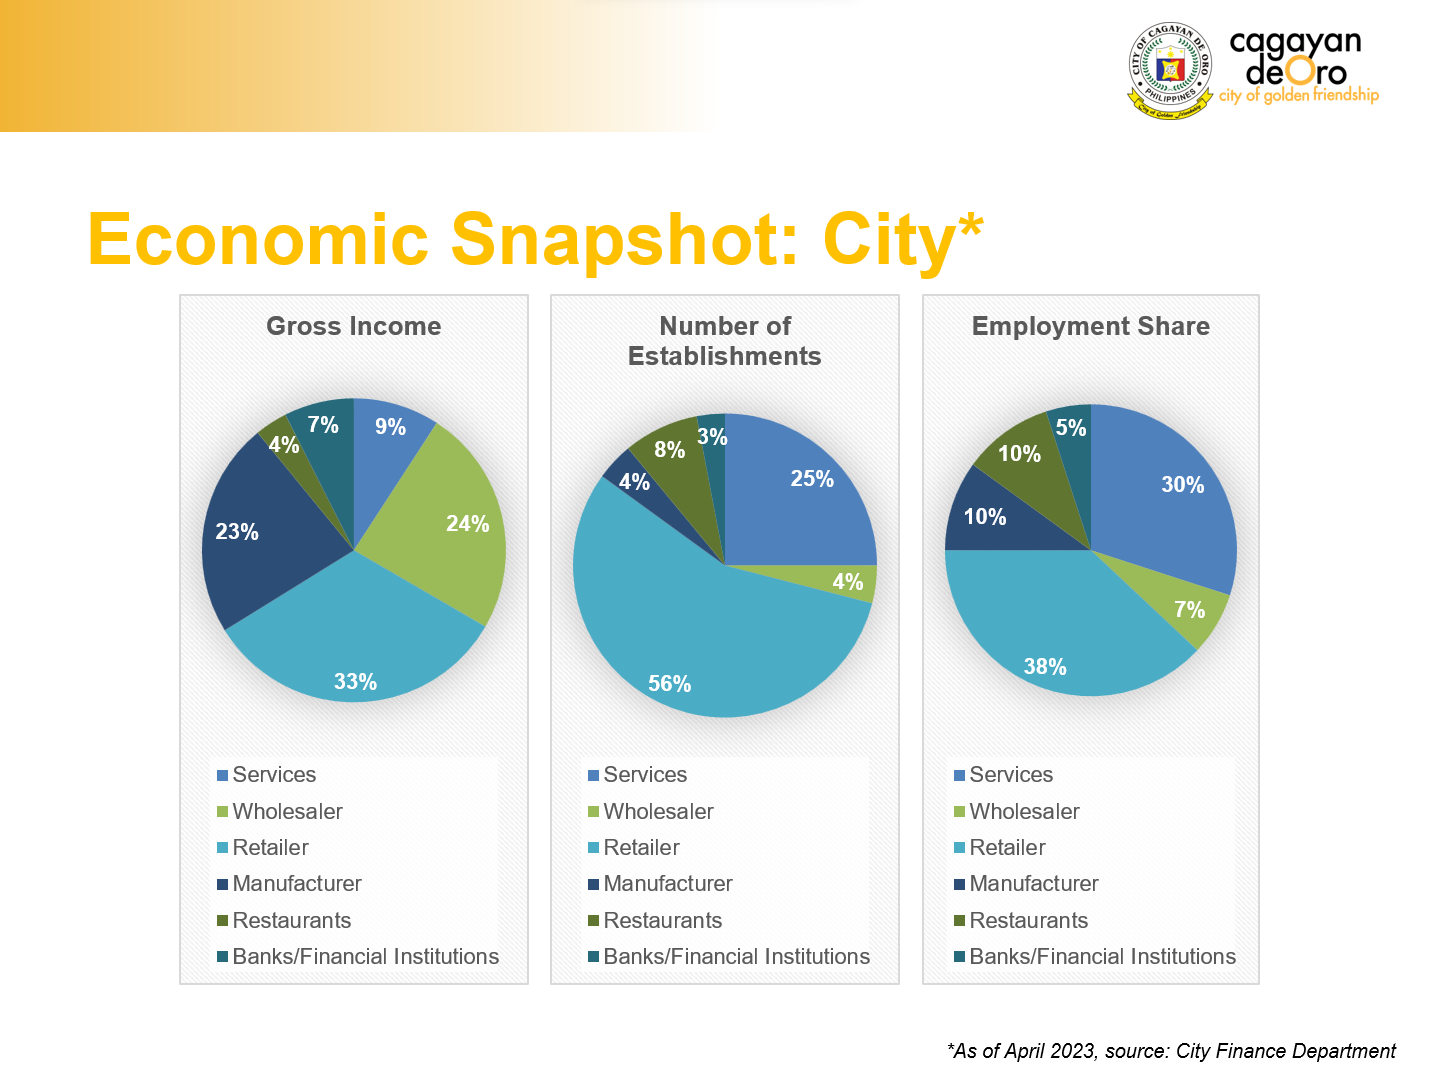 Services makes up the lion’s share in the city’s economy in terms of gross income, number of establishments, and employment share